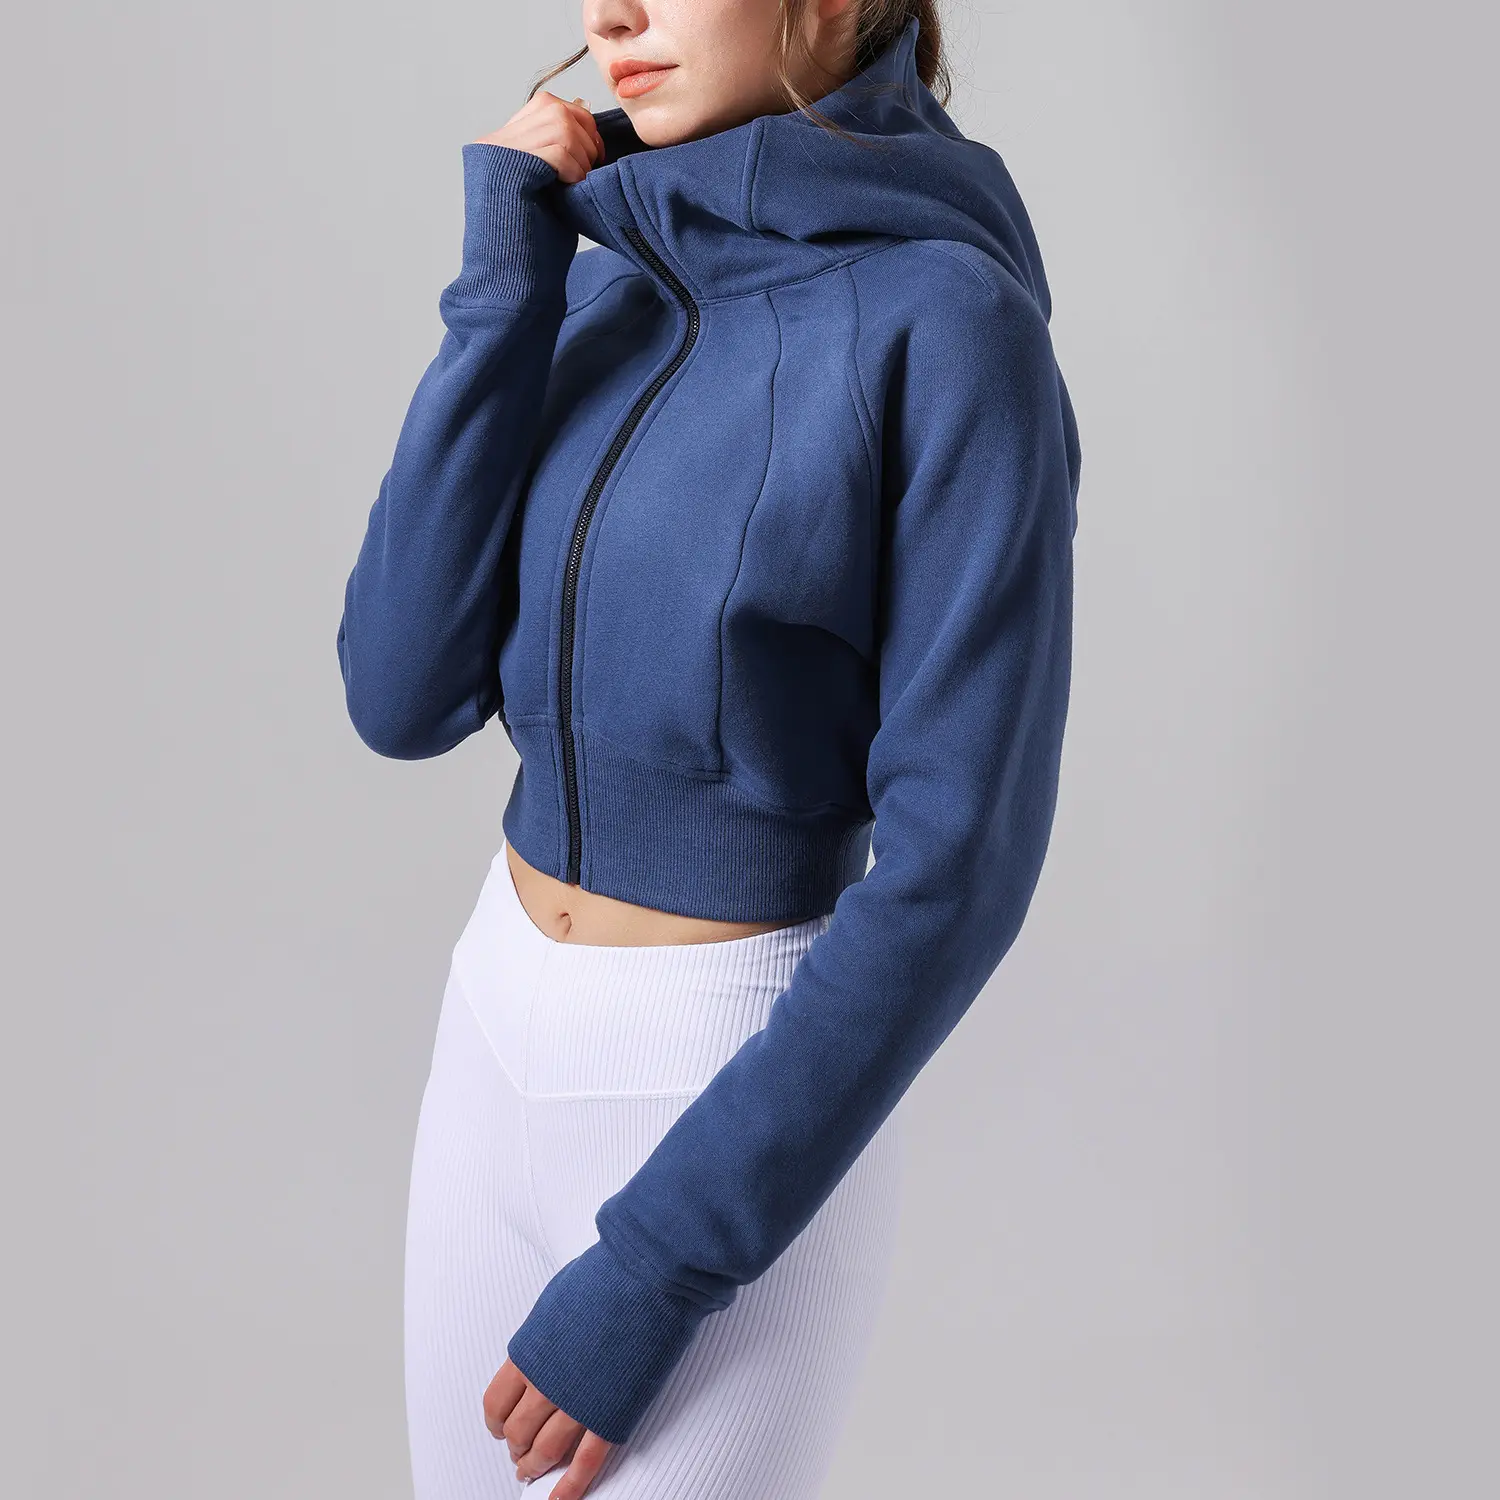 Women Hooded Yoga Jacket Long Sleeve Sports Top Zip Pocket Fitness Winter Warm Gym Activewear Running Coats Workout Clothes